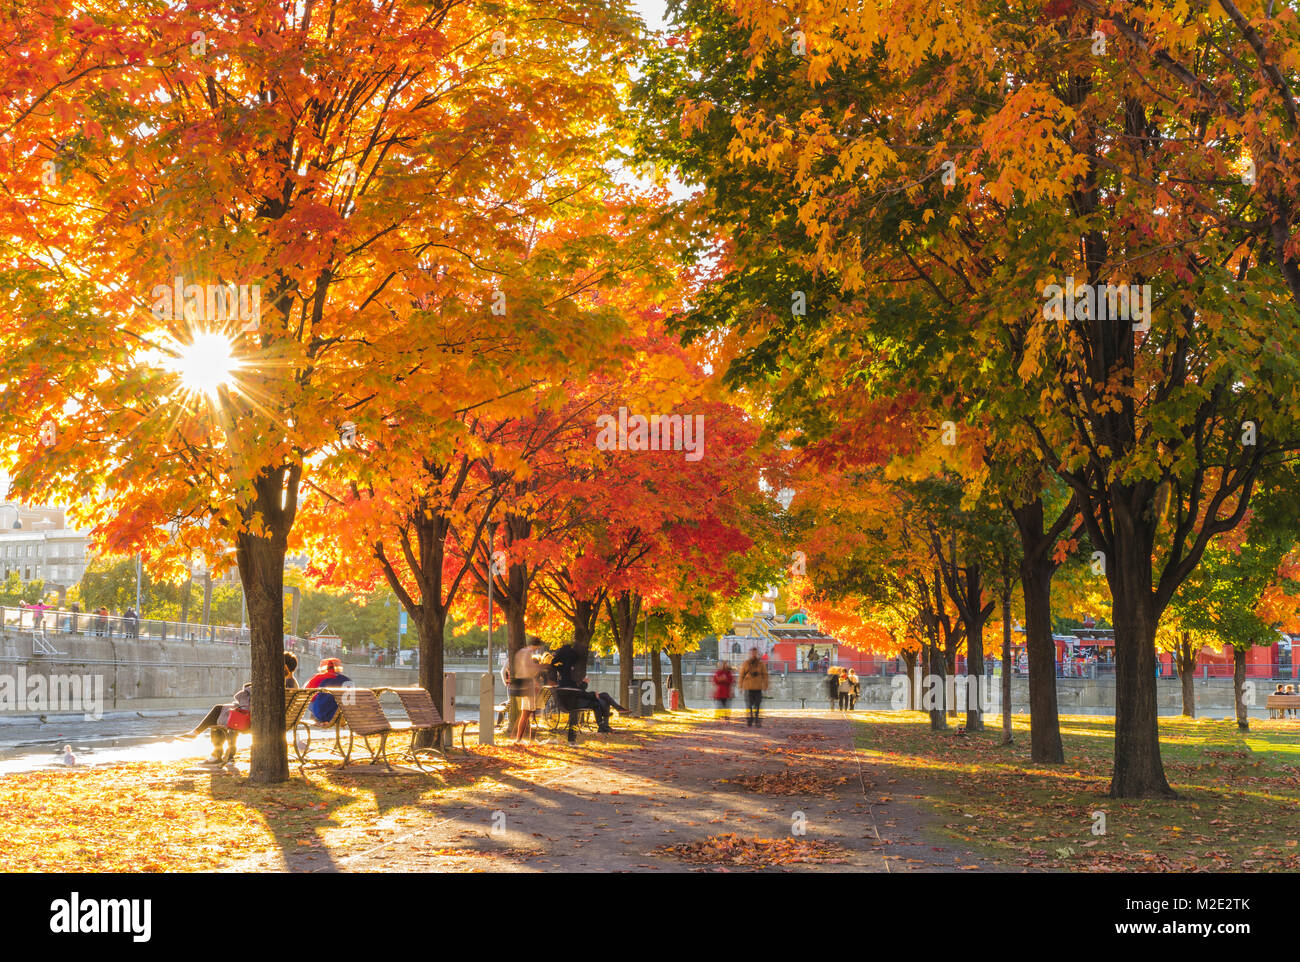 People in park in autumn Stock Photo